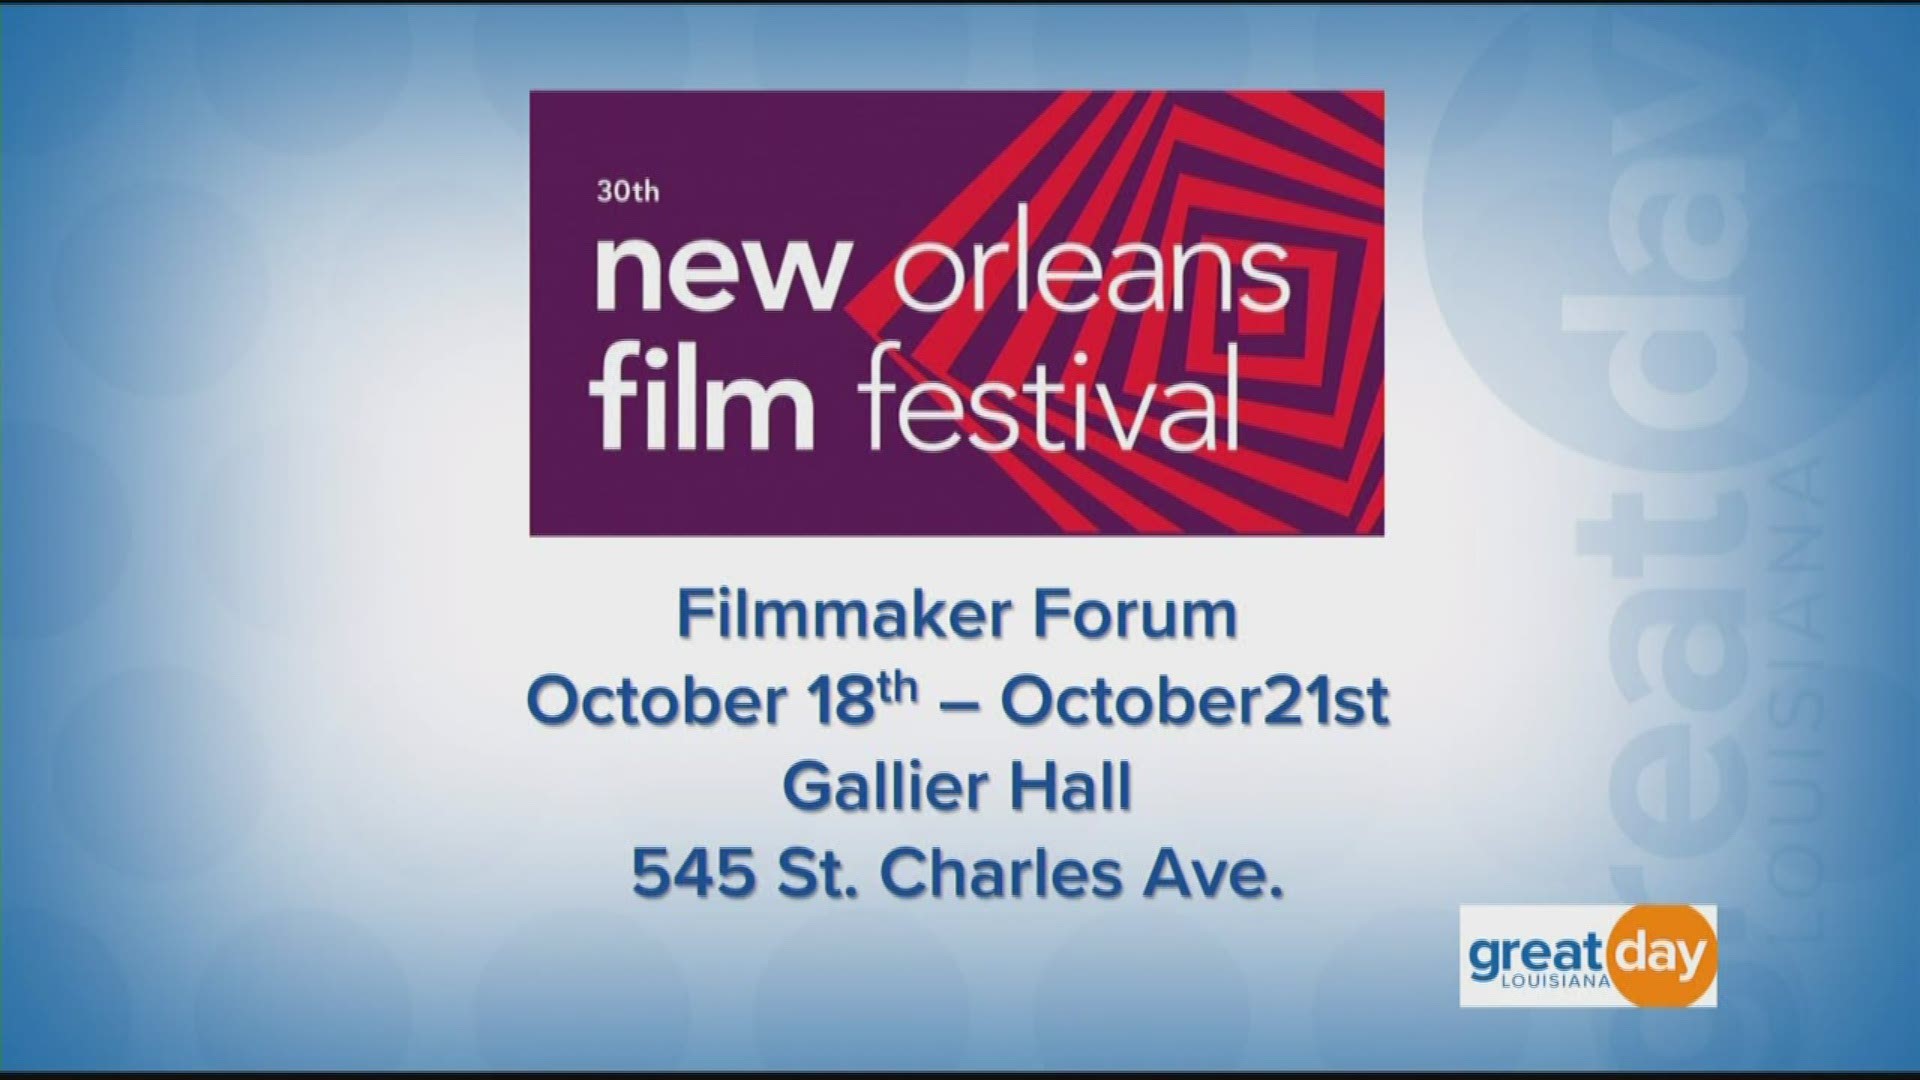 Celebrating 30 years of film! Head to NewOrleansFilmSociety.org for more information.